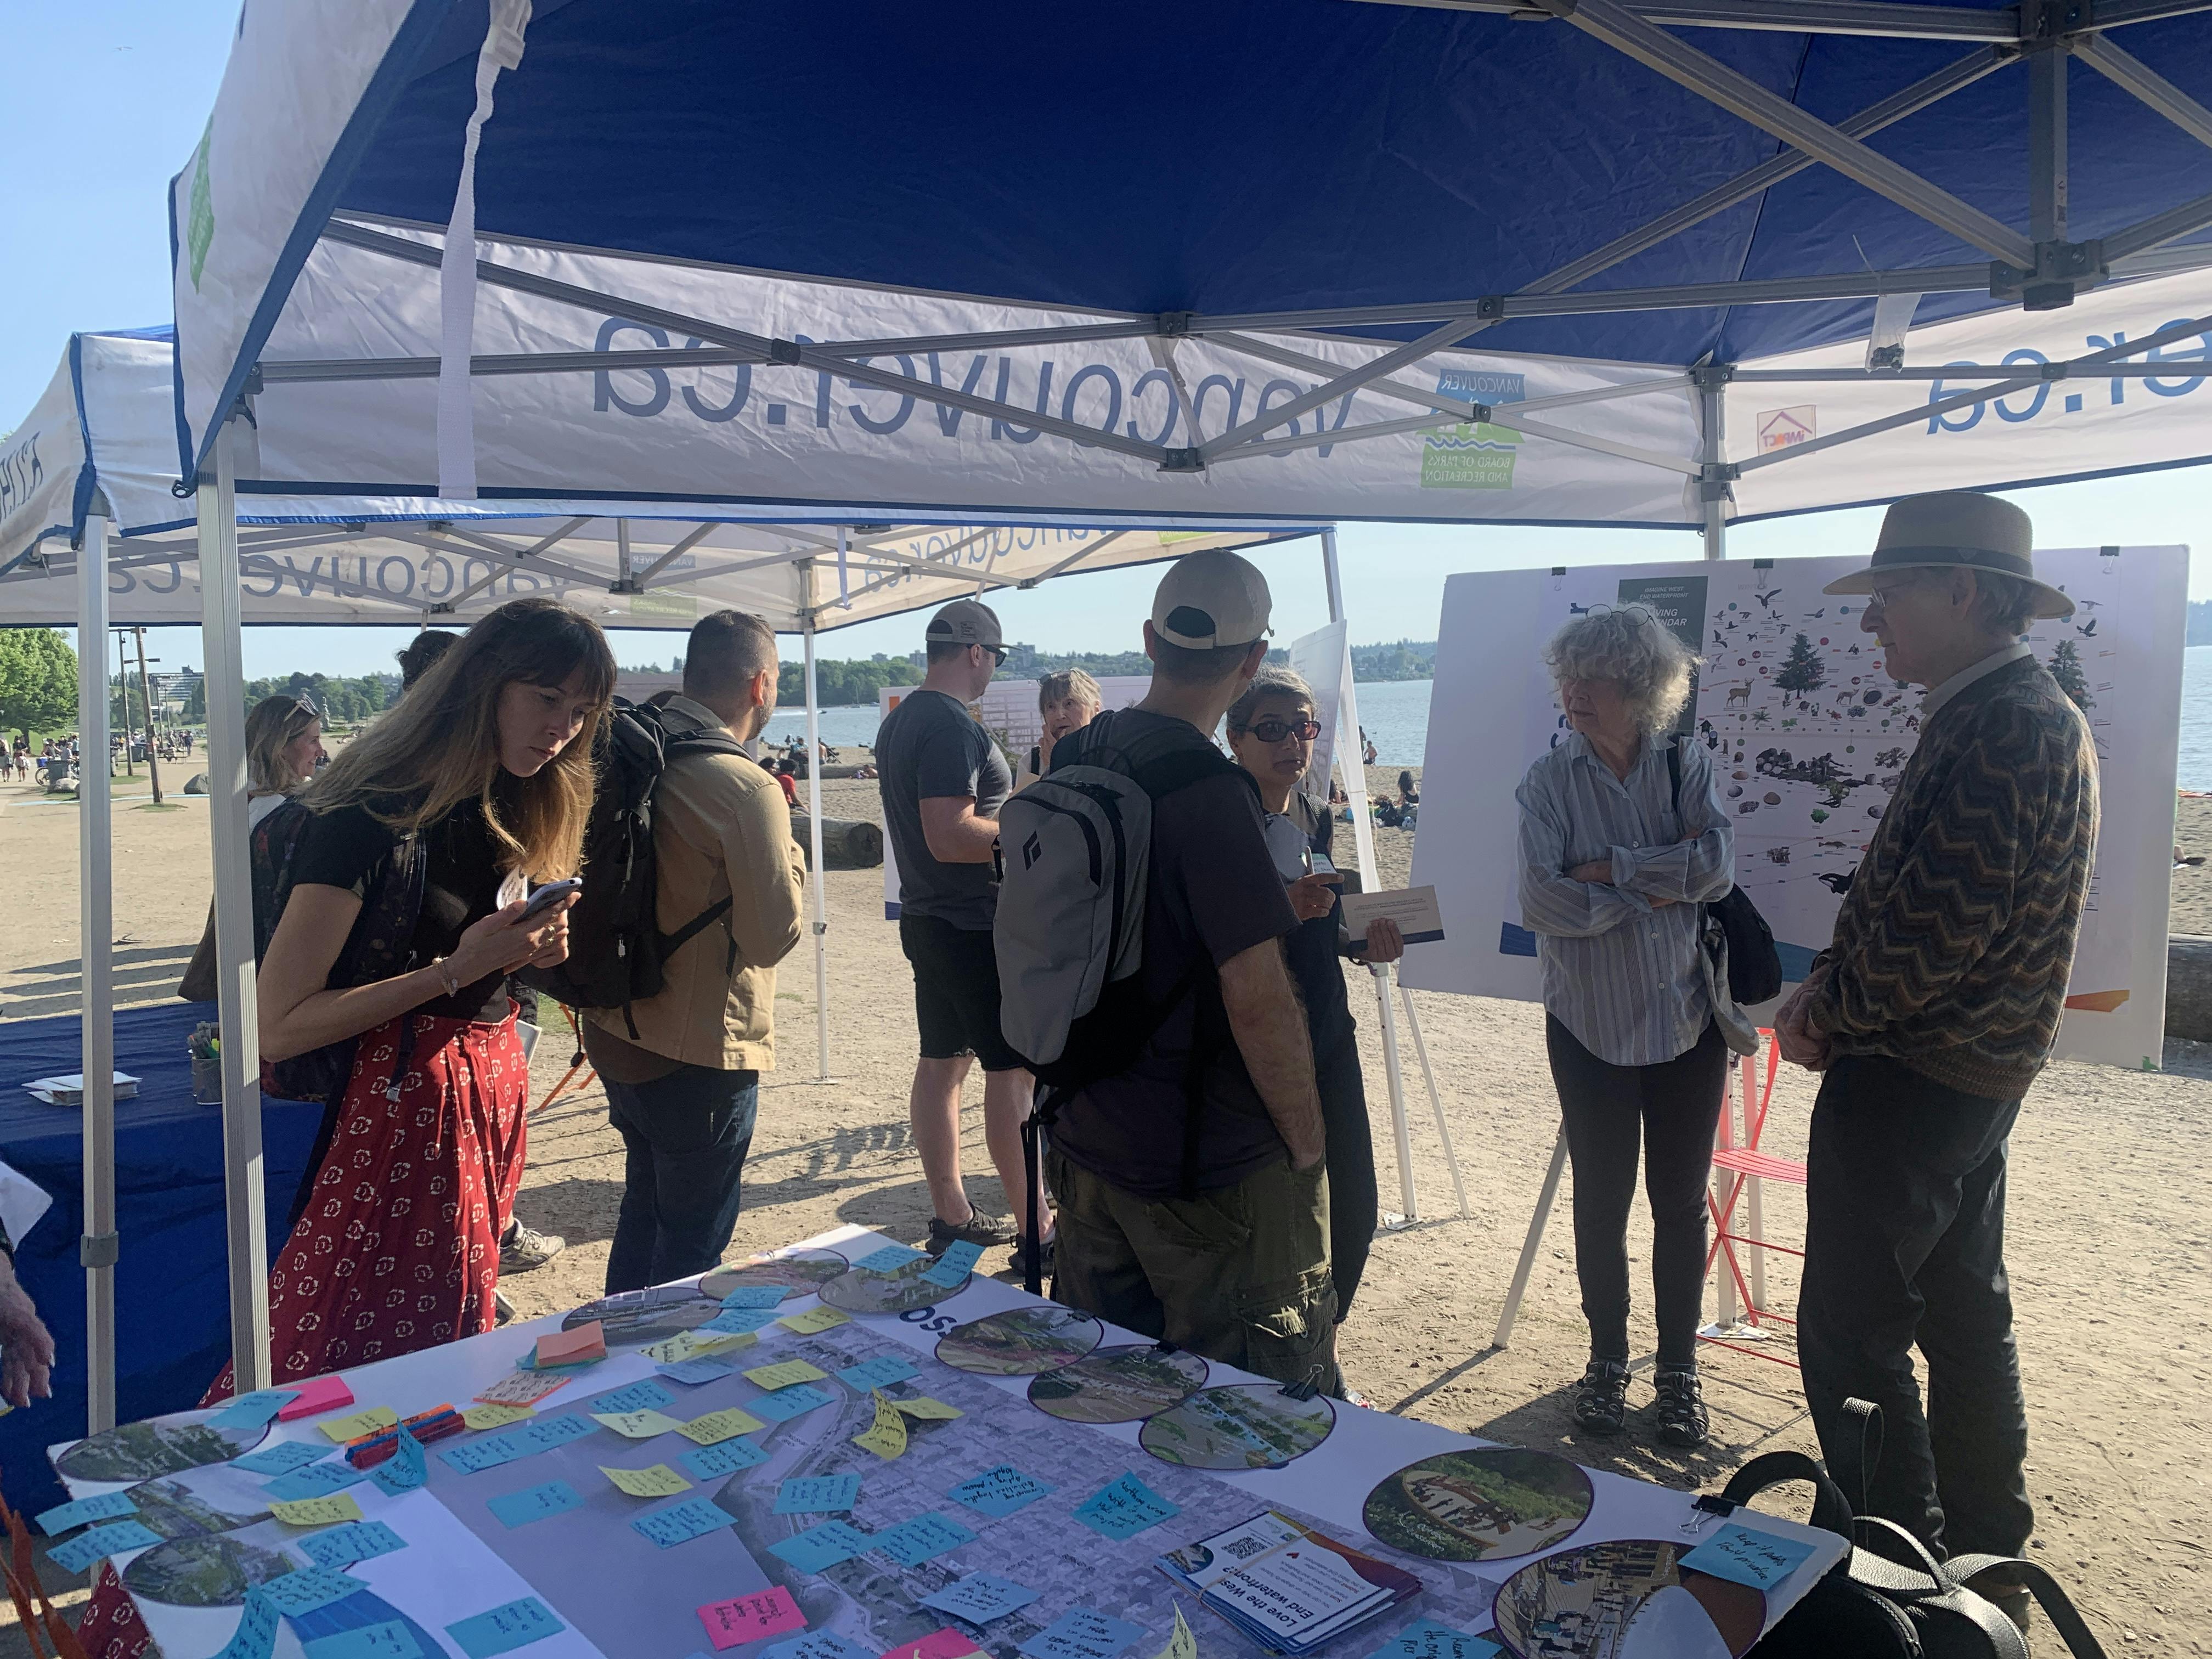 Round 2 engagement: conversations with people at the English Bay Pop-Up 